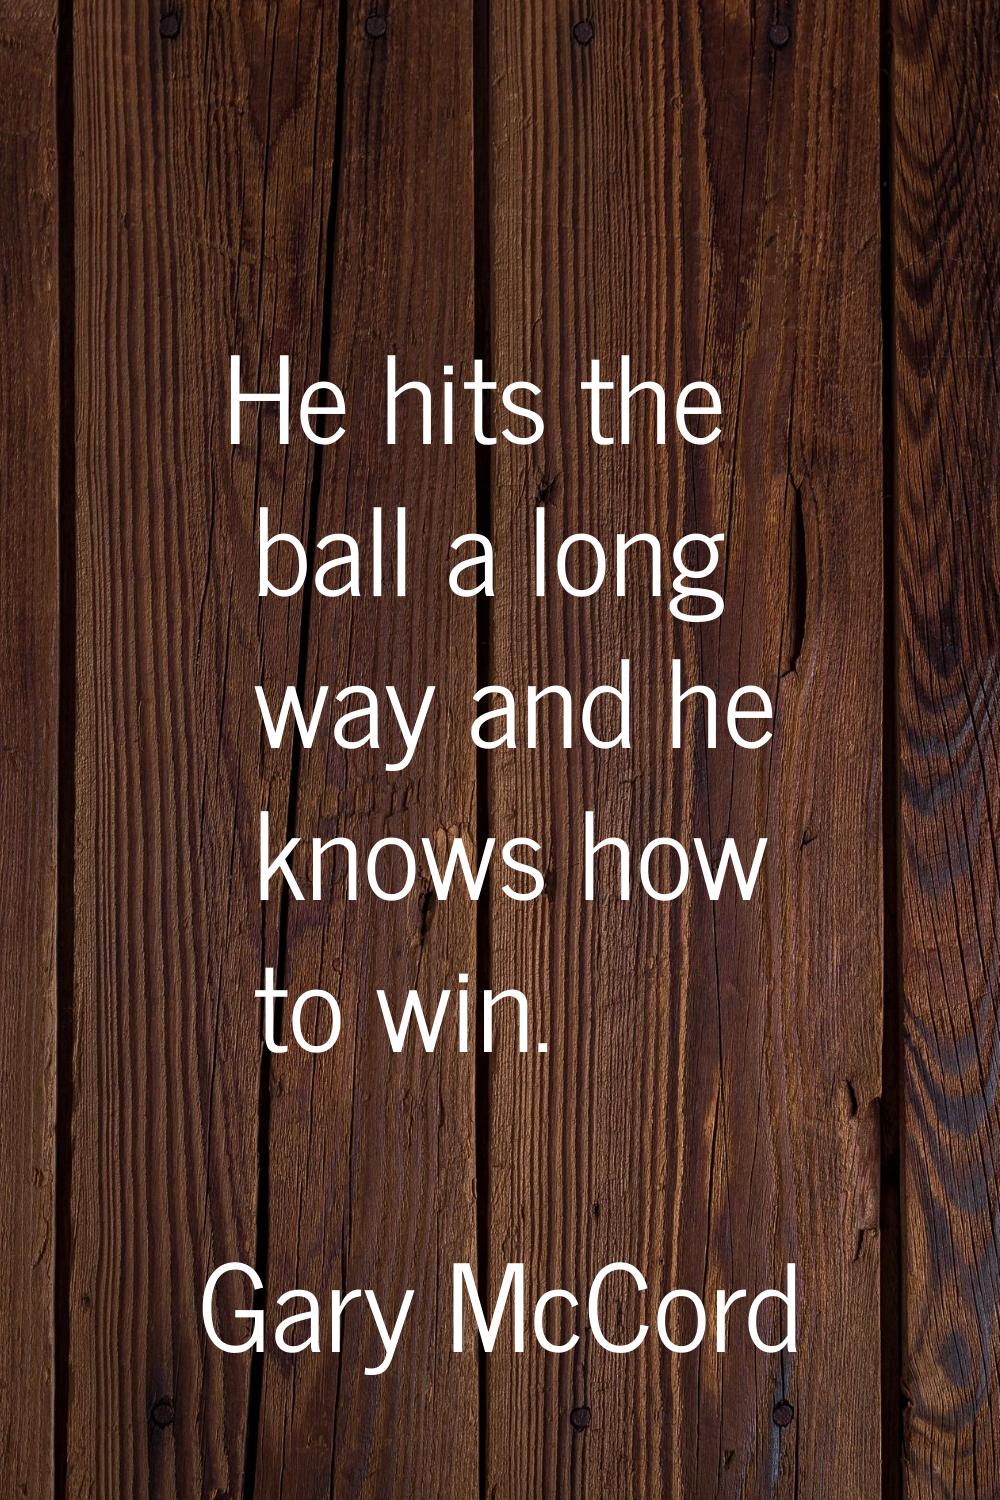 He hits the ball a long way and he knows how to win.